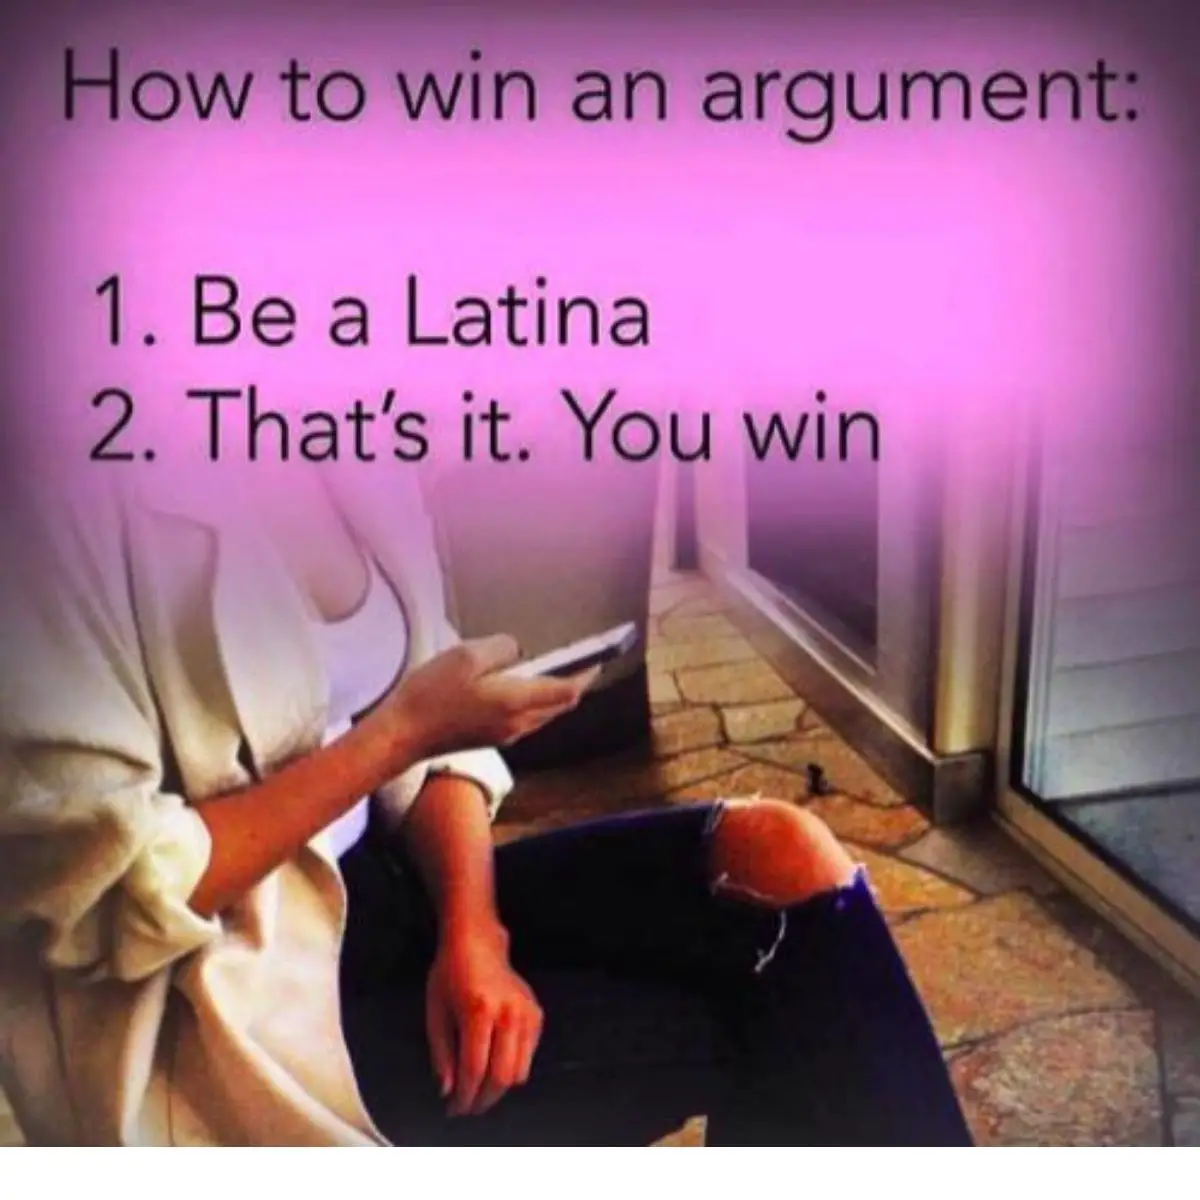 How to win argument meme on Latina